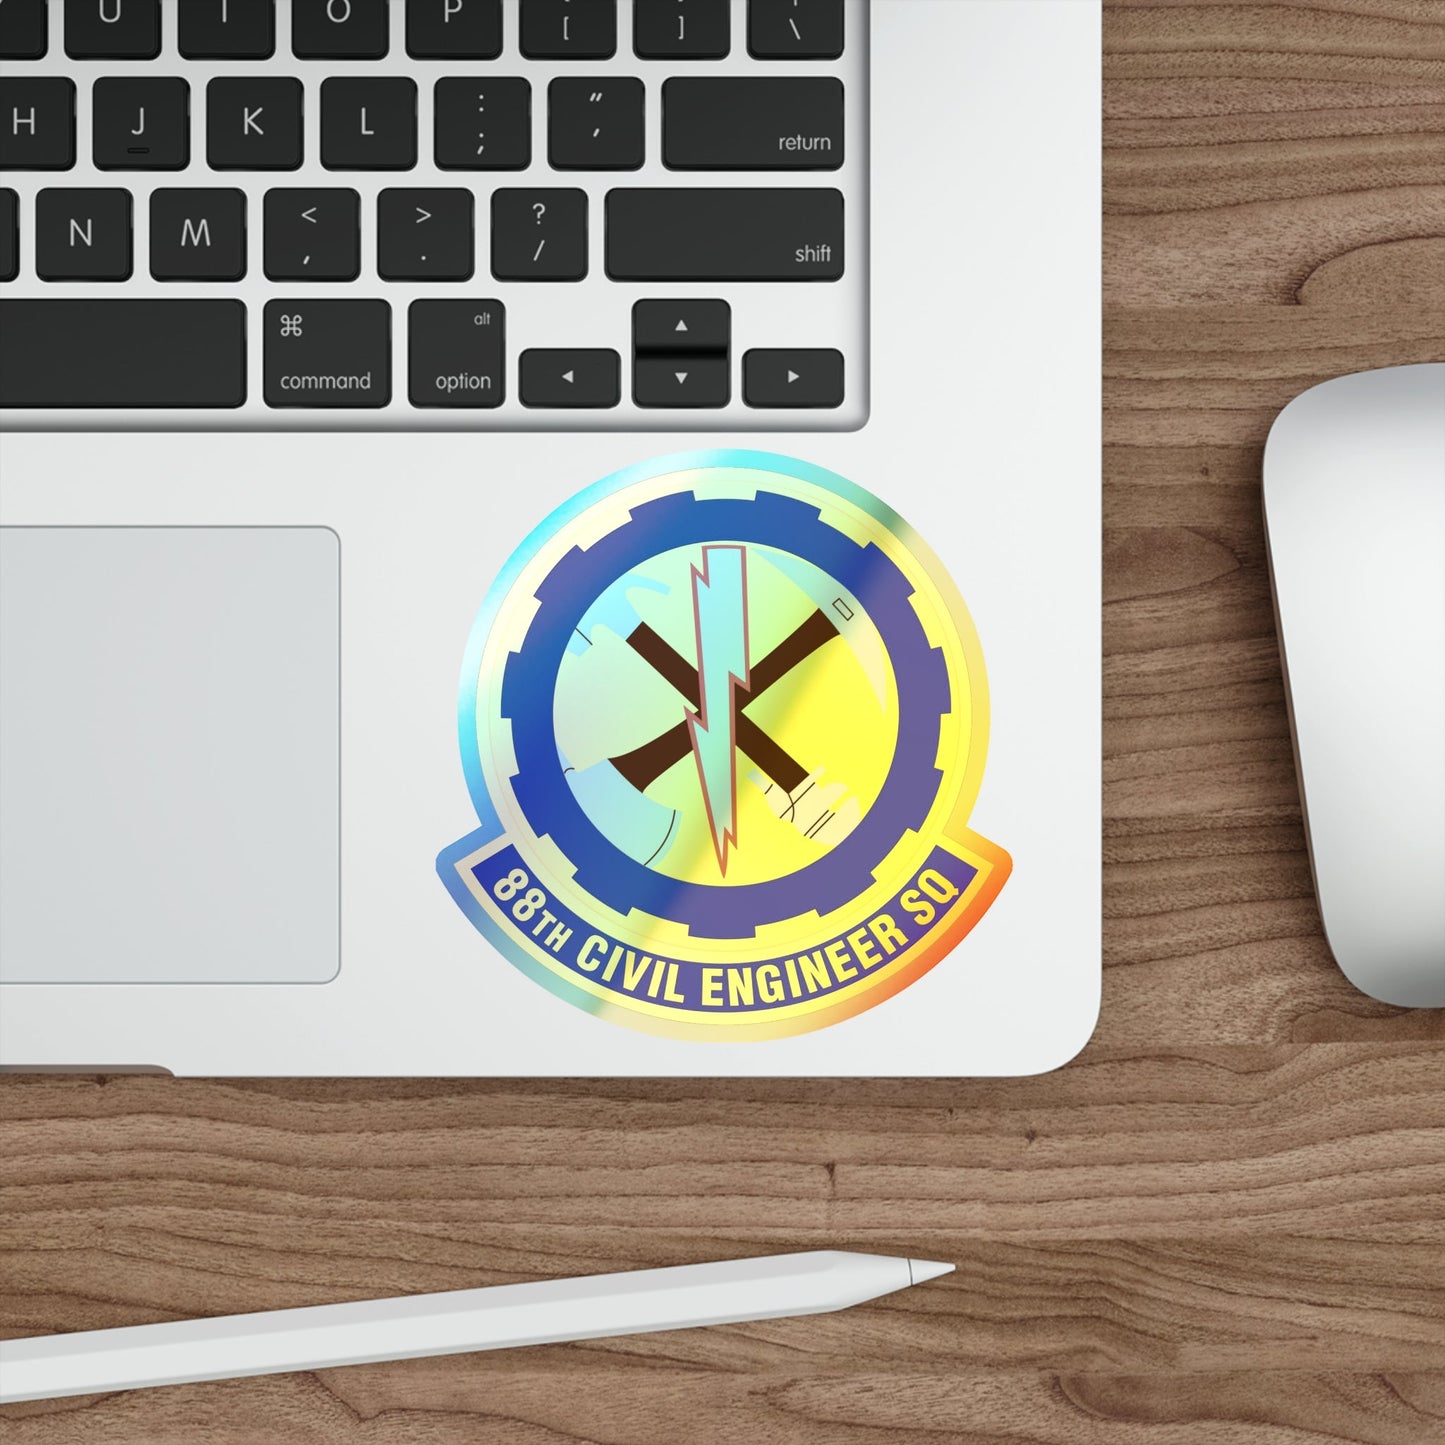 88 Civil Engineer Squadron AFMC (U.S. Air Force) Holographic STICKER Die-Cut Vinyl Decal-The Sticker Space